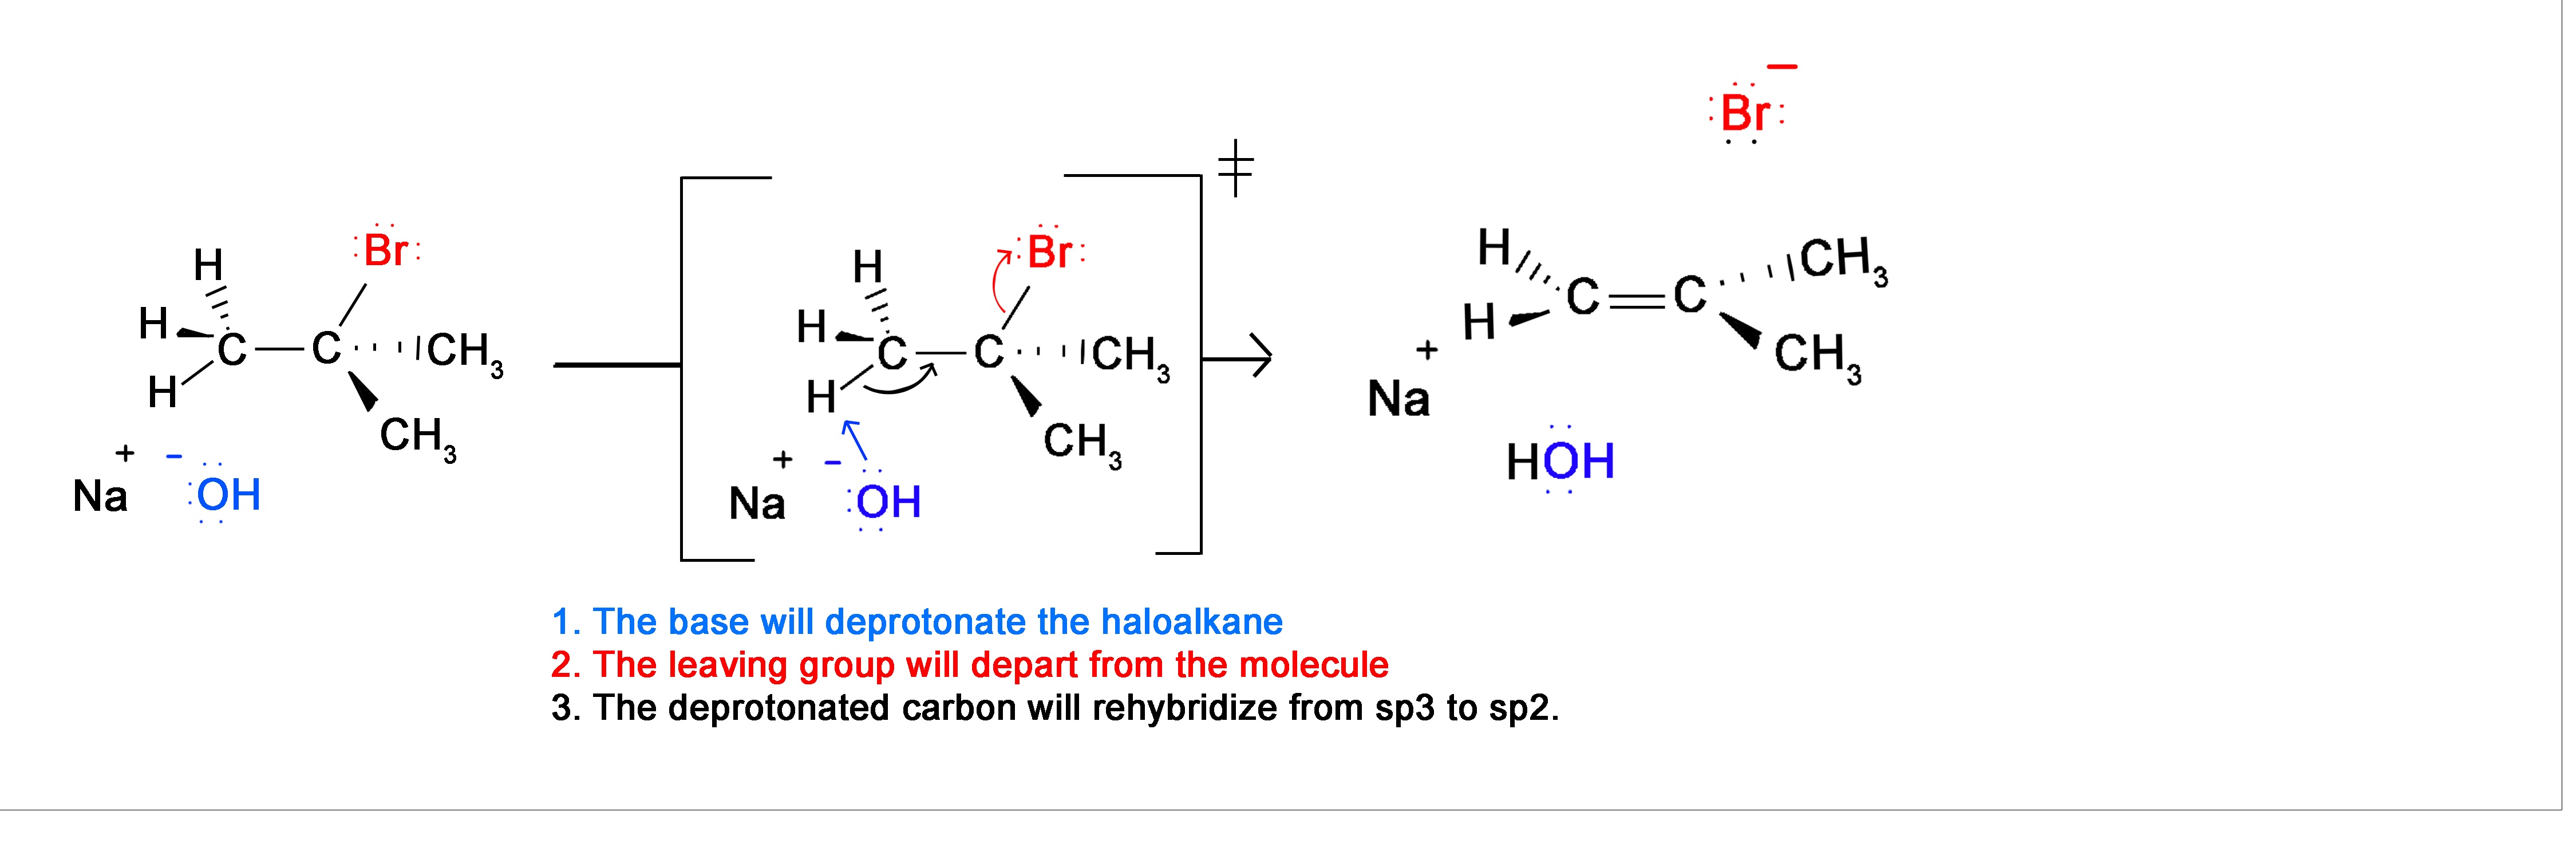 The base will deprotonate the haloalkane. the leaving group will depart from the molecule. The deprotonated carbon will rehybridize from s p 3 to s p 2. 